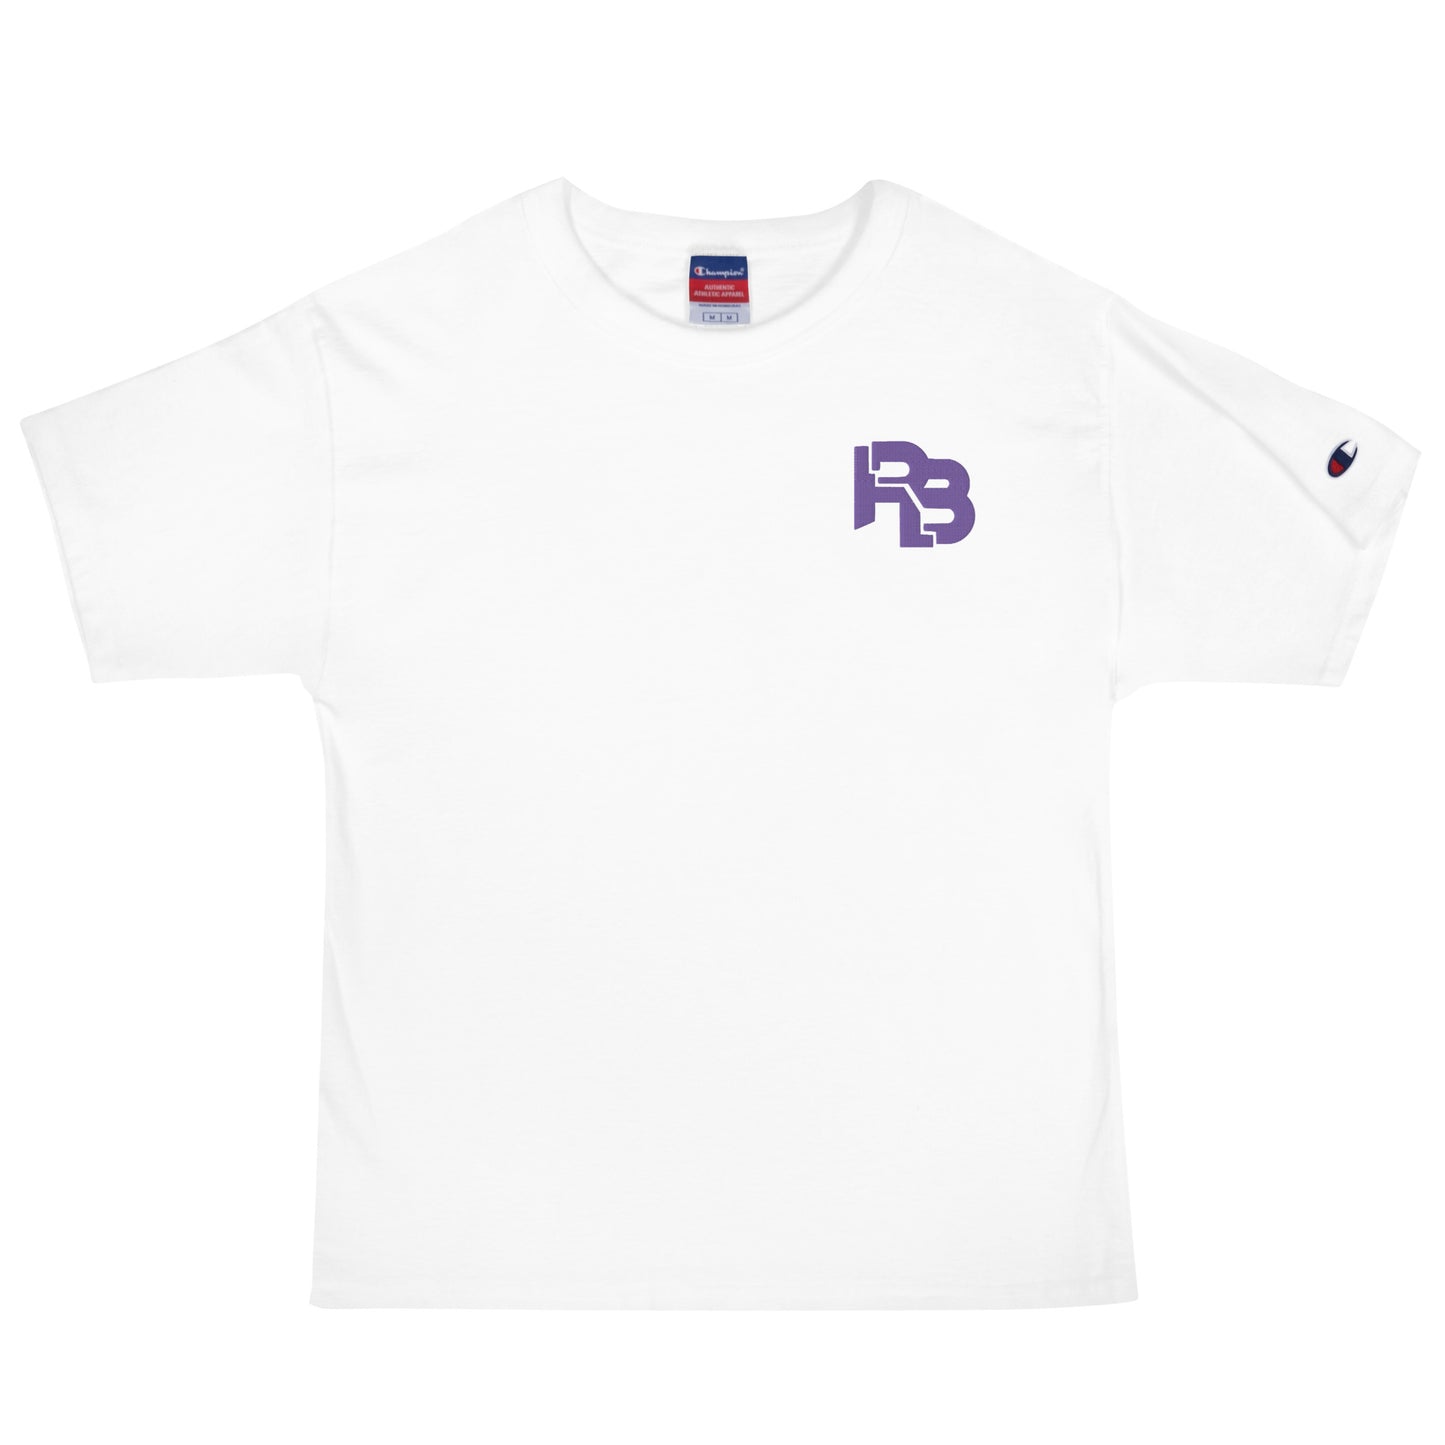 RB Embroidered Men's Champion T-Shirt